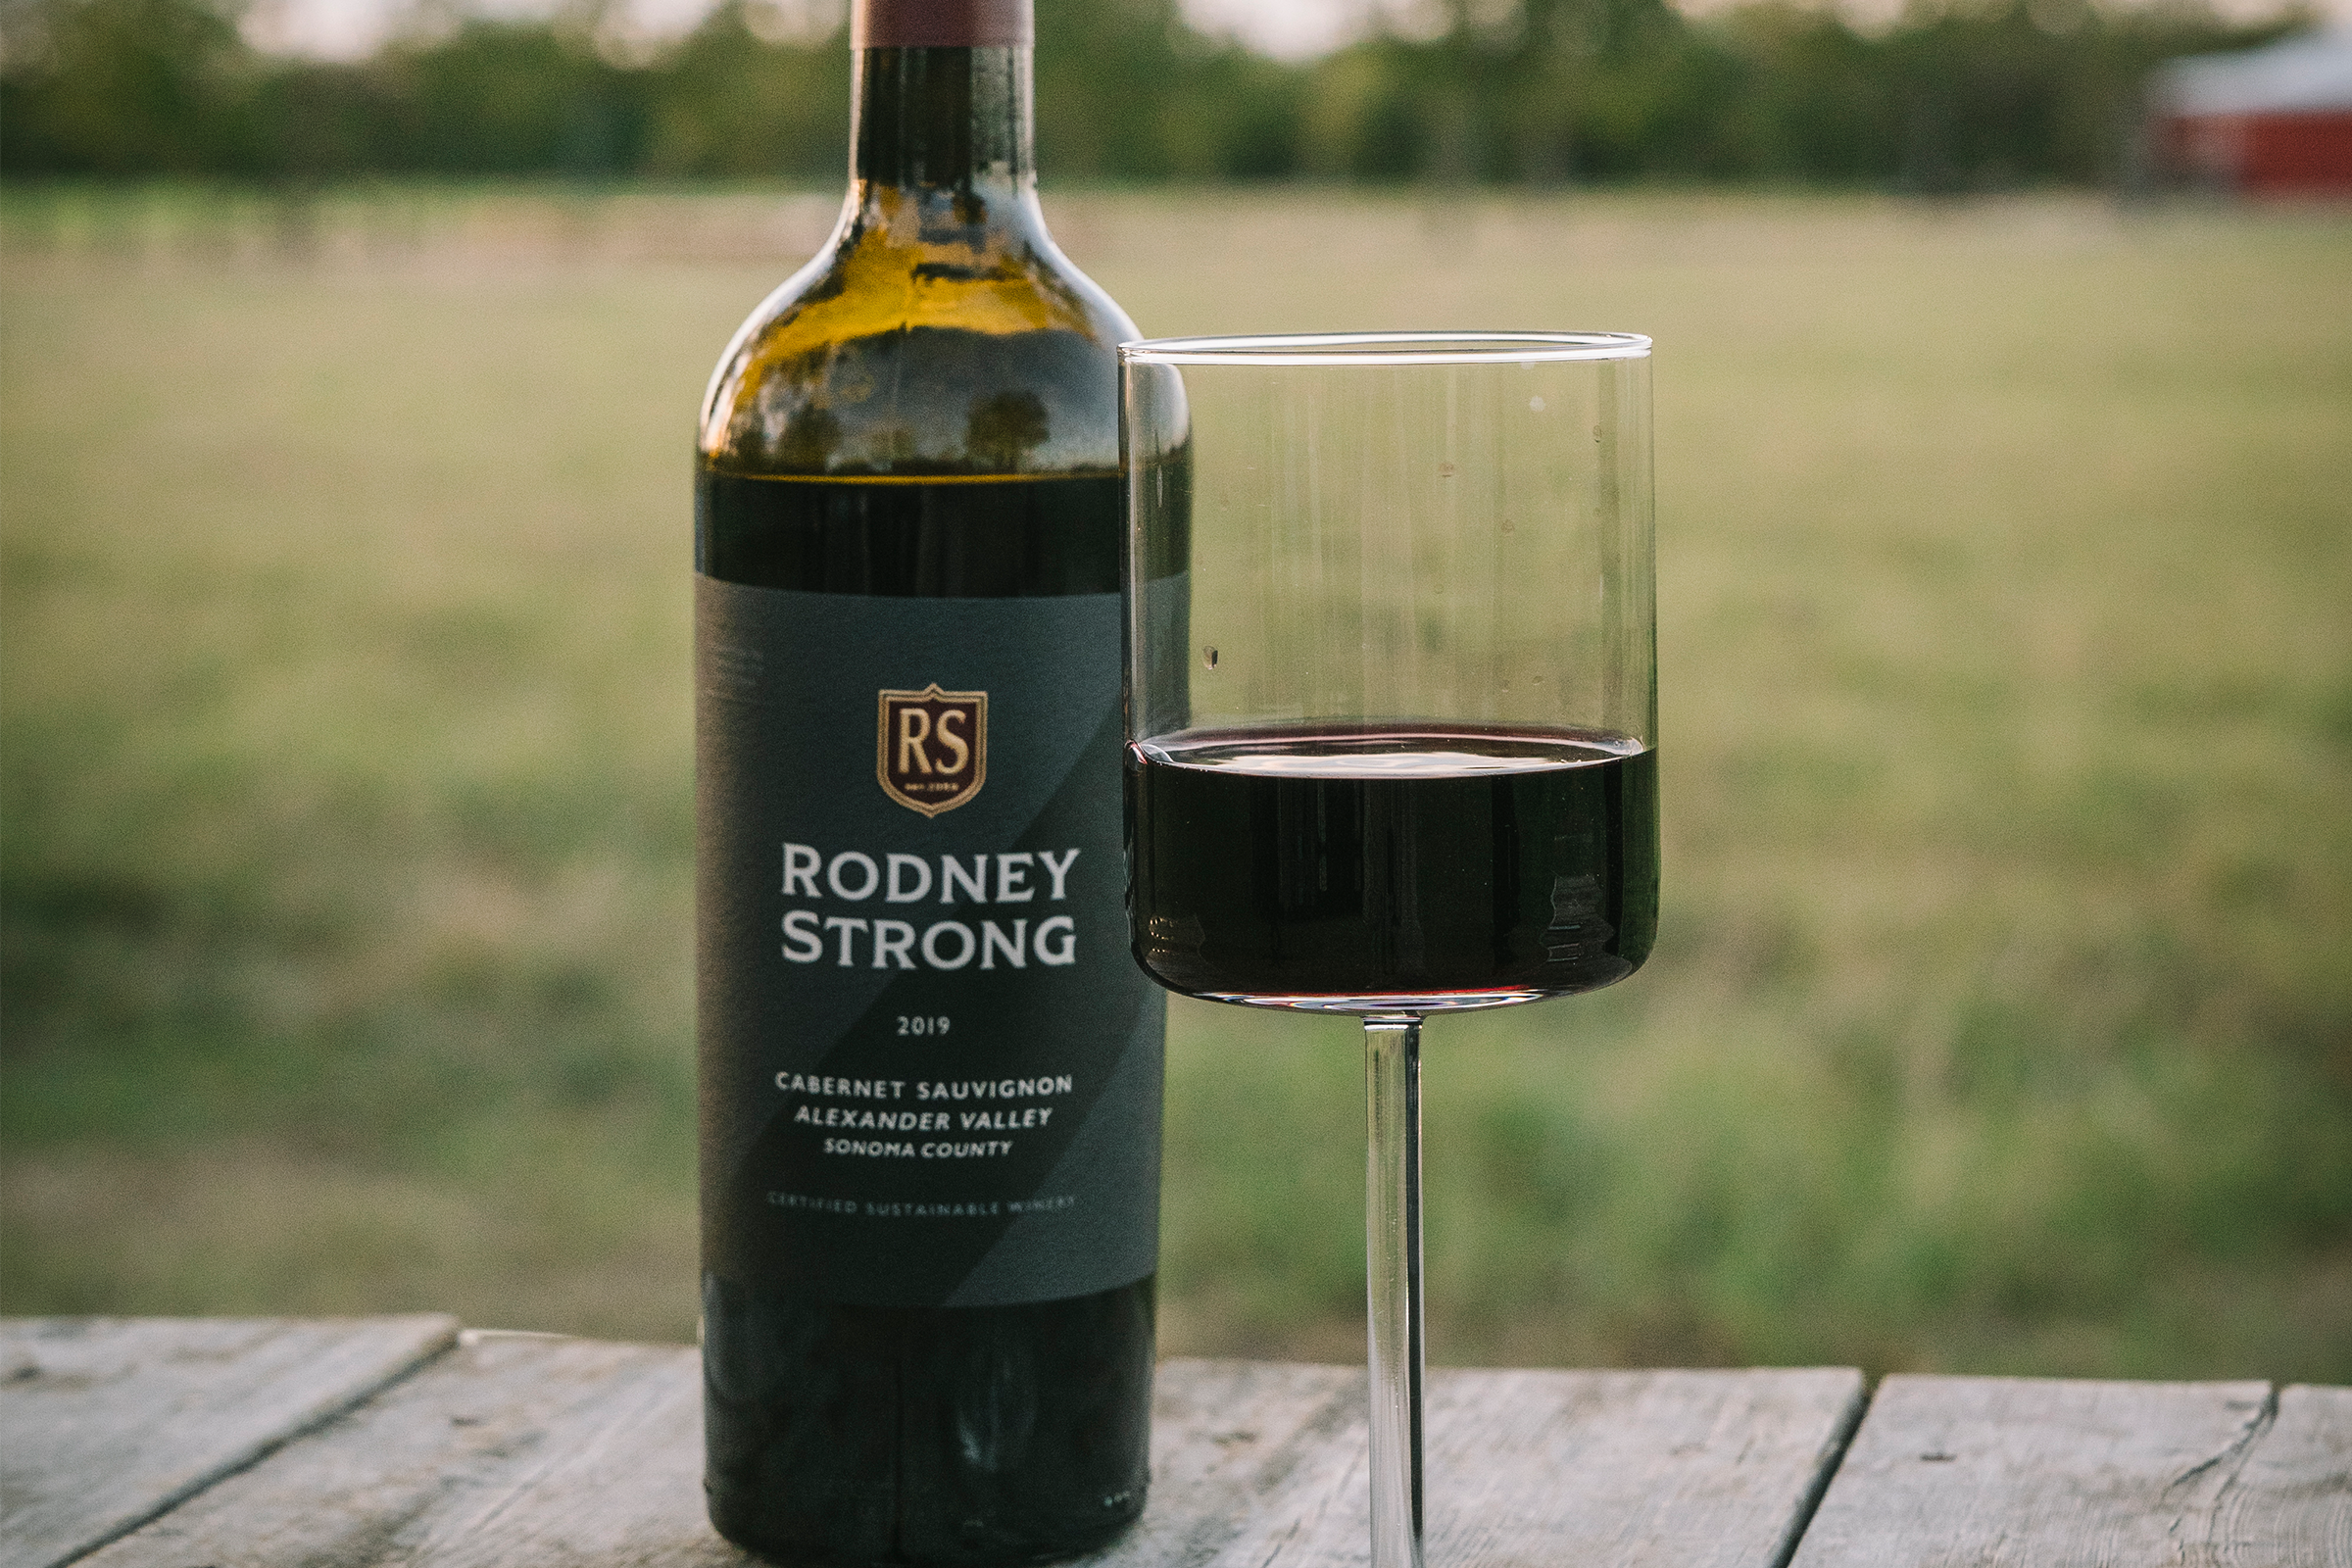 Bottle and glass of Rodney Strong Cabernet Sauvignon Alexander Valley 2019